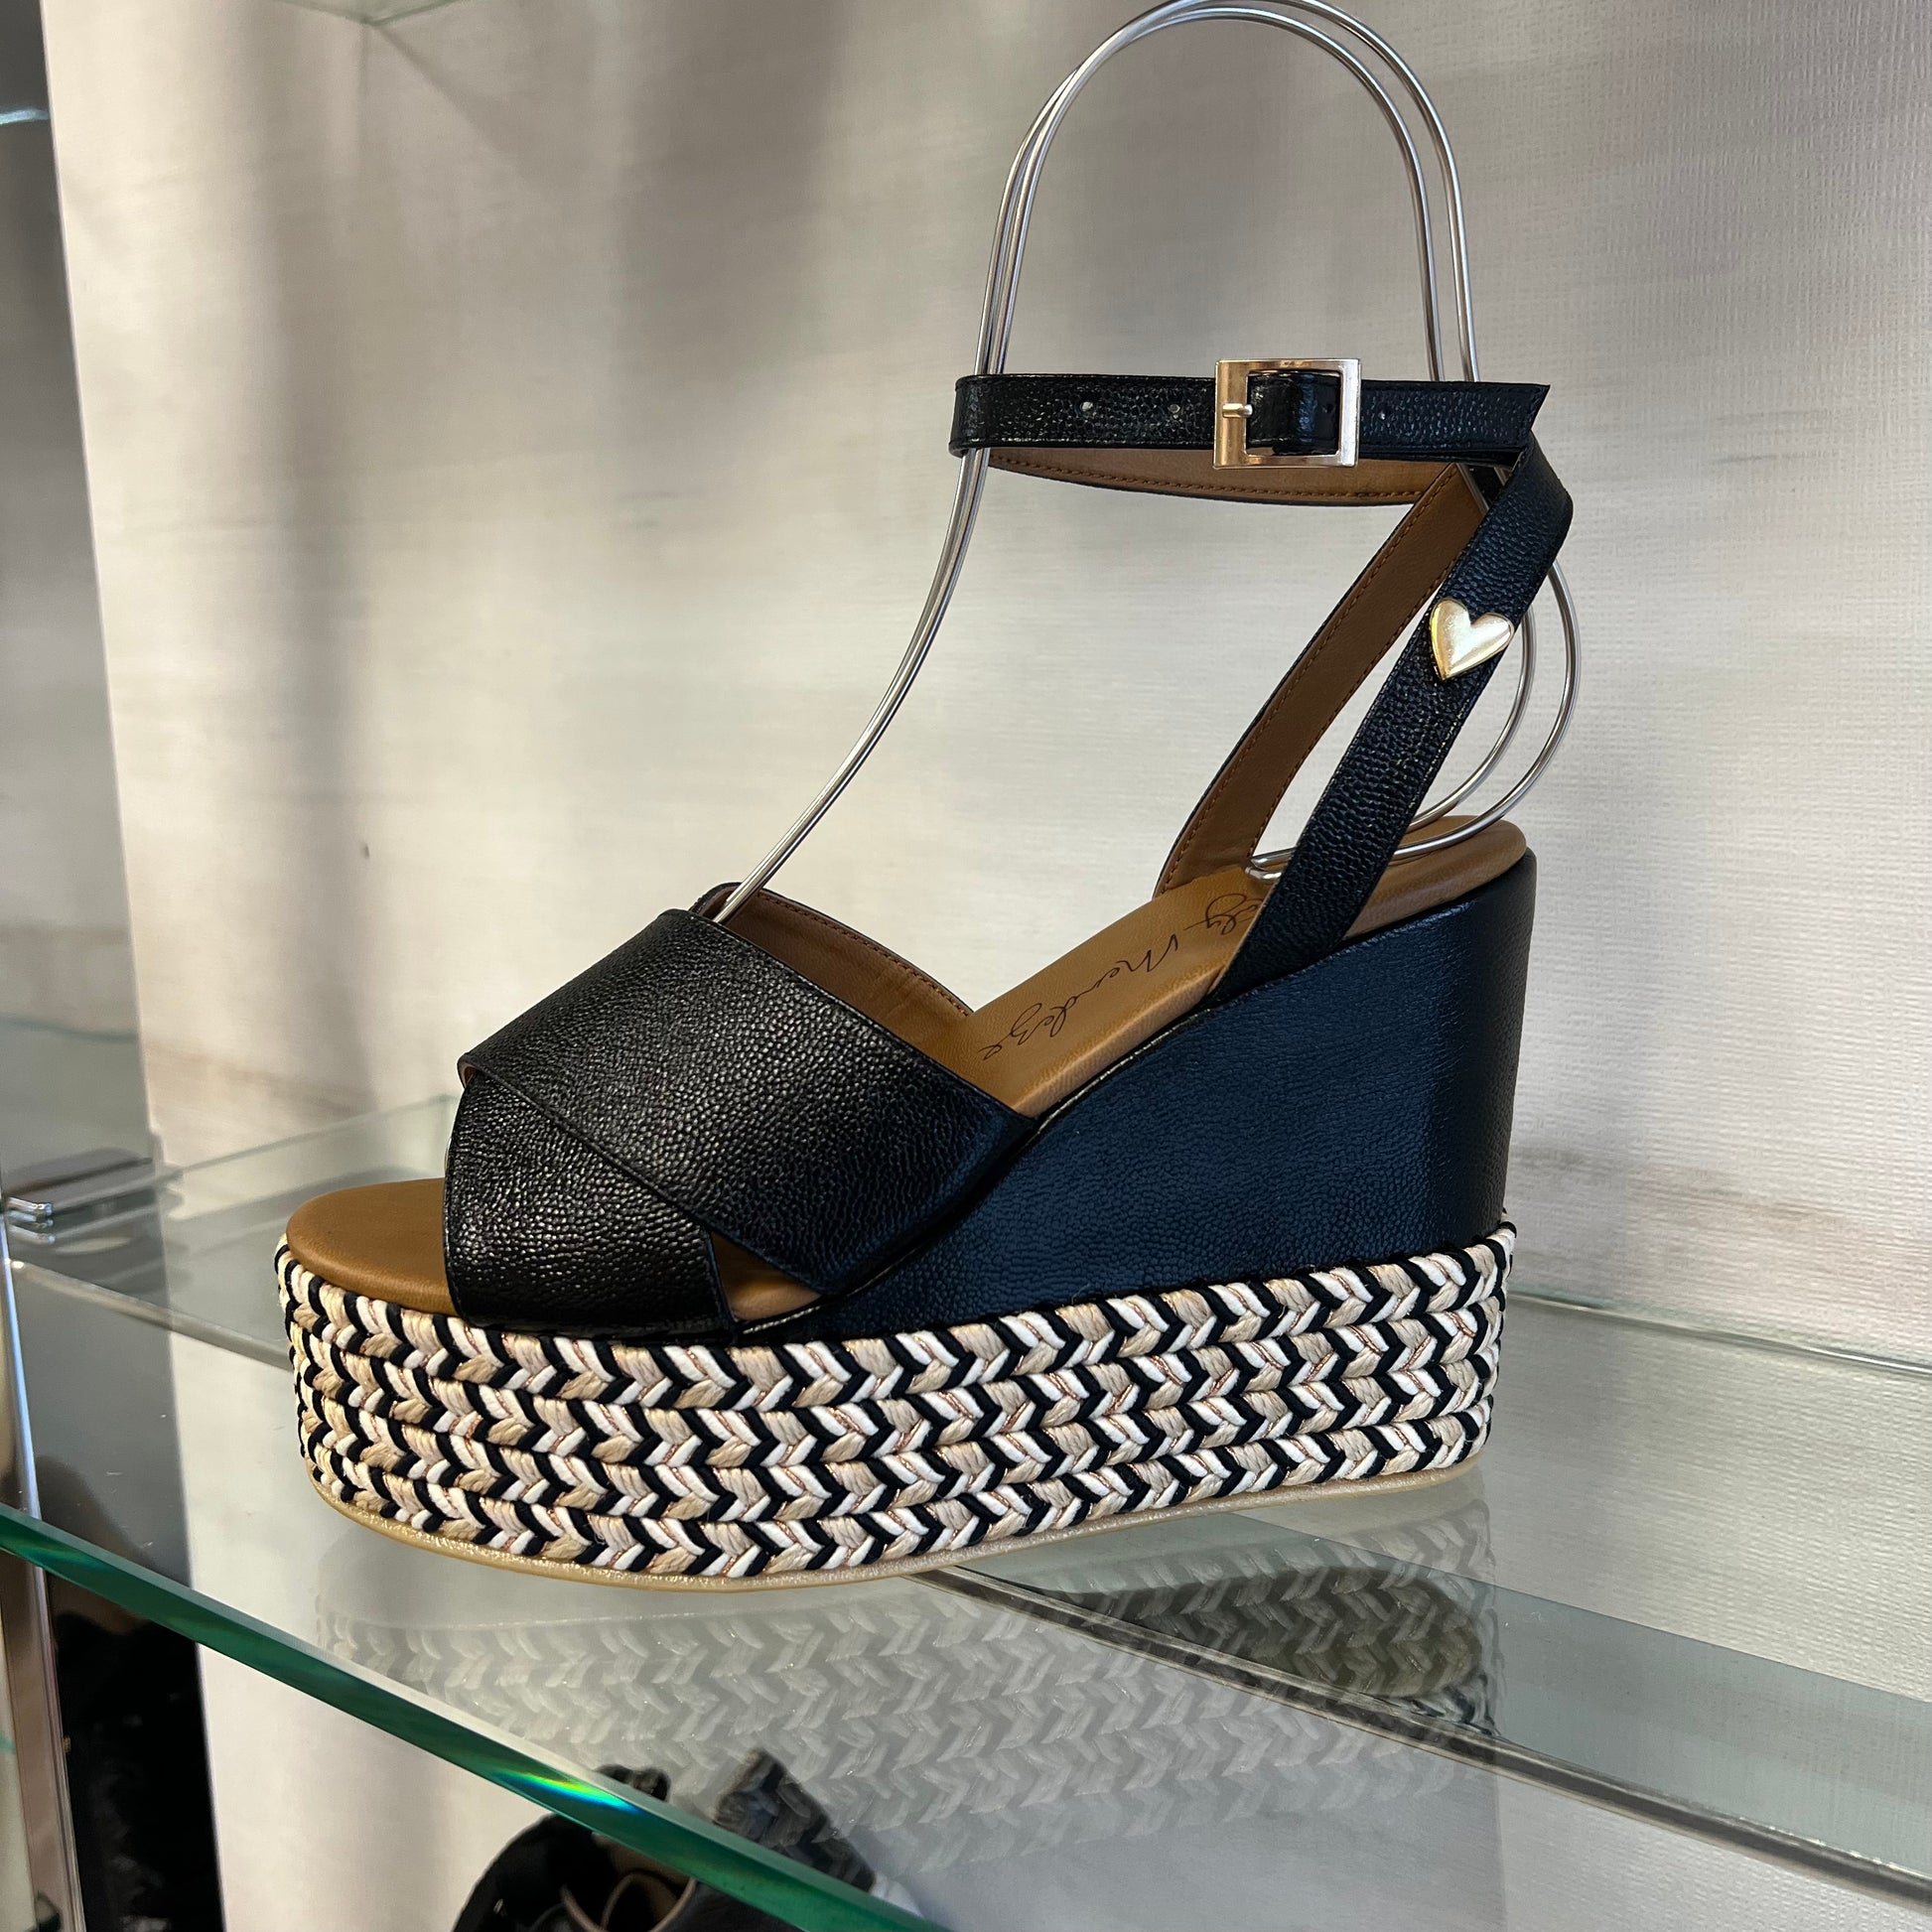 Masha Sandals by Nataly Mendez FEATURES Genuine leather upper material Genuine leather insole lining Flexible rubber sole Handmade 4.75 inch high heel 1.5 inch platform